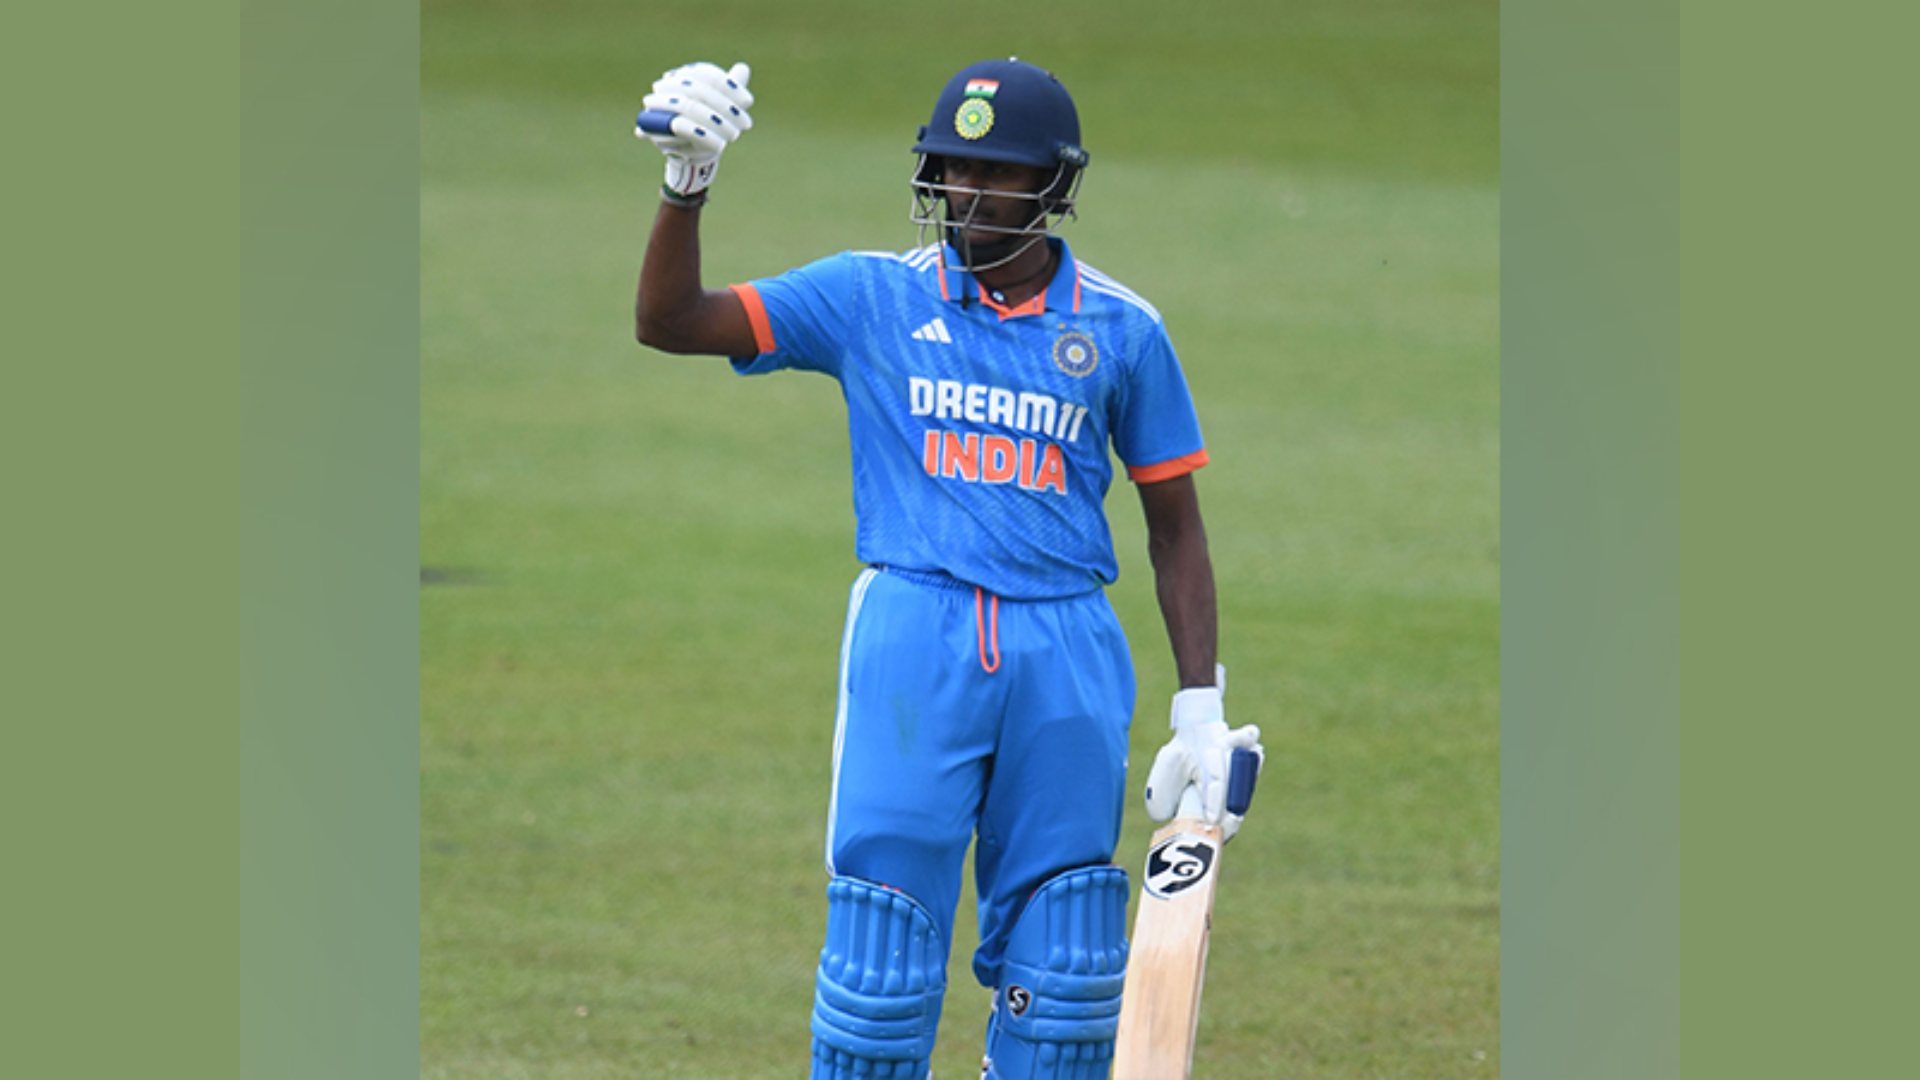 On his first encounter against Australia in the first ODI, Sudharsan said, “I think we have reacted well”